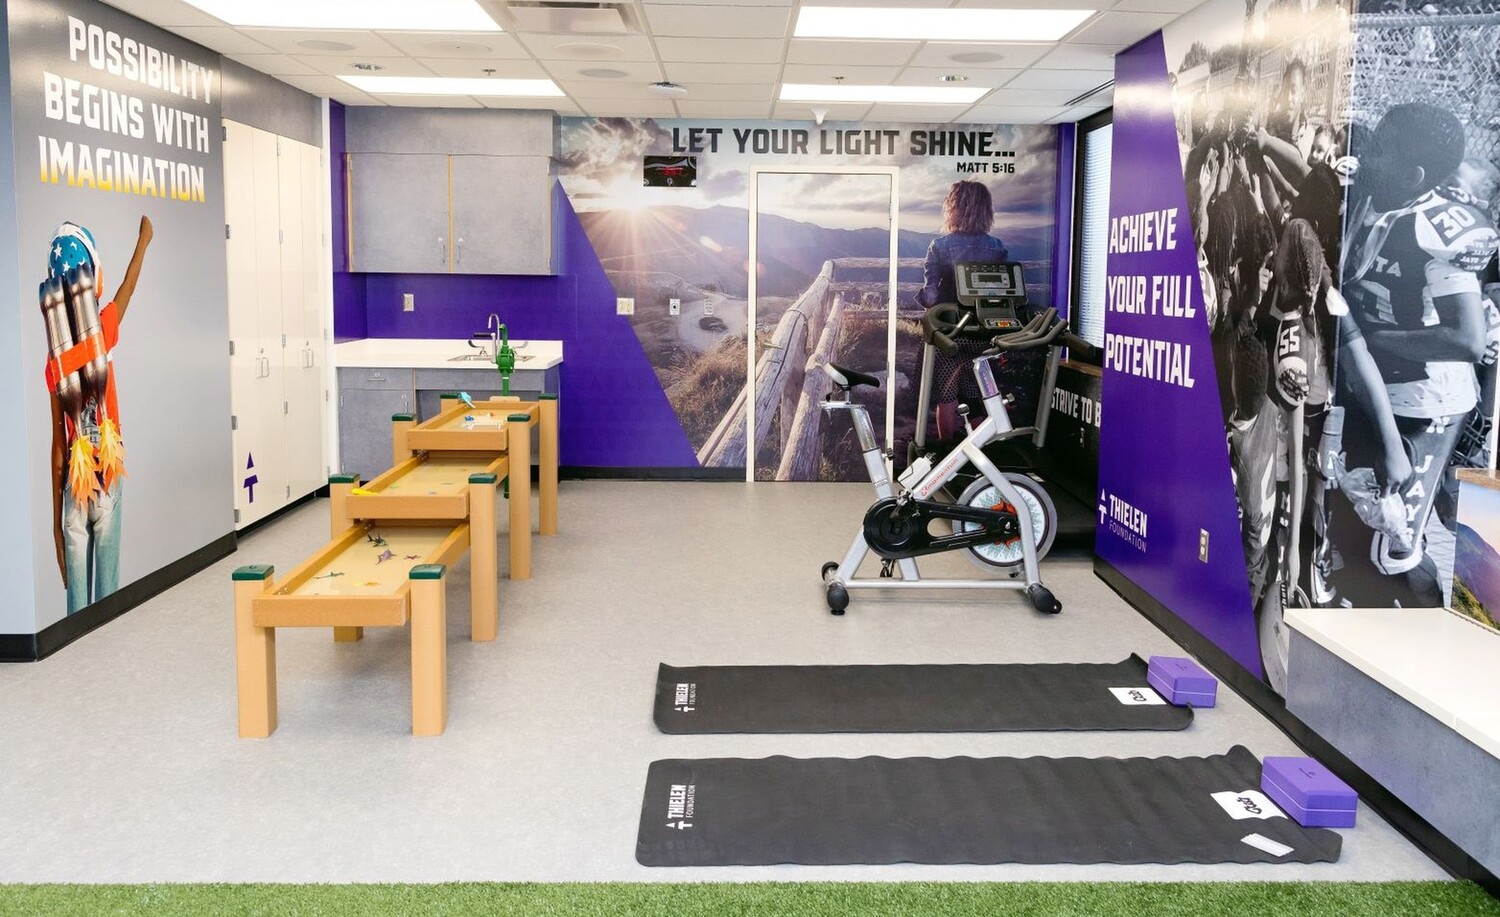 a wide shot of the Thielen Foundation Workout Room, showing a water table, exercise bike, and yoga mats